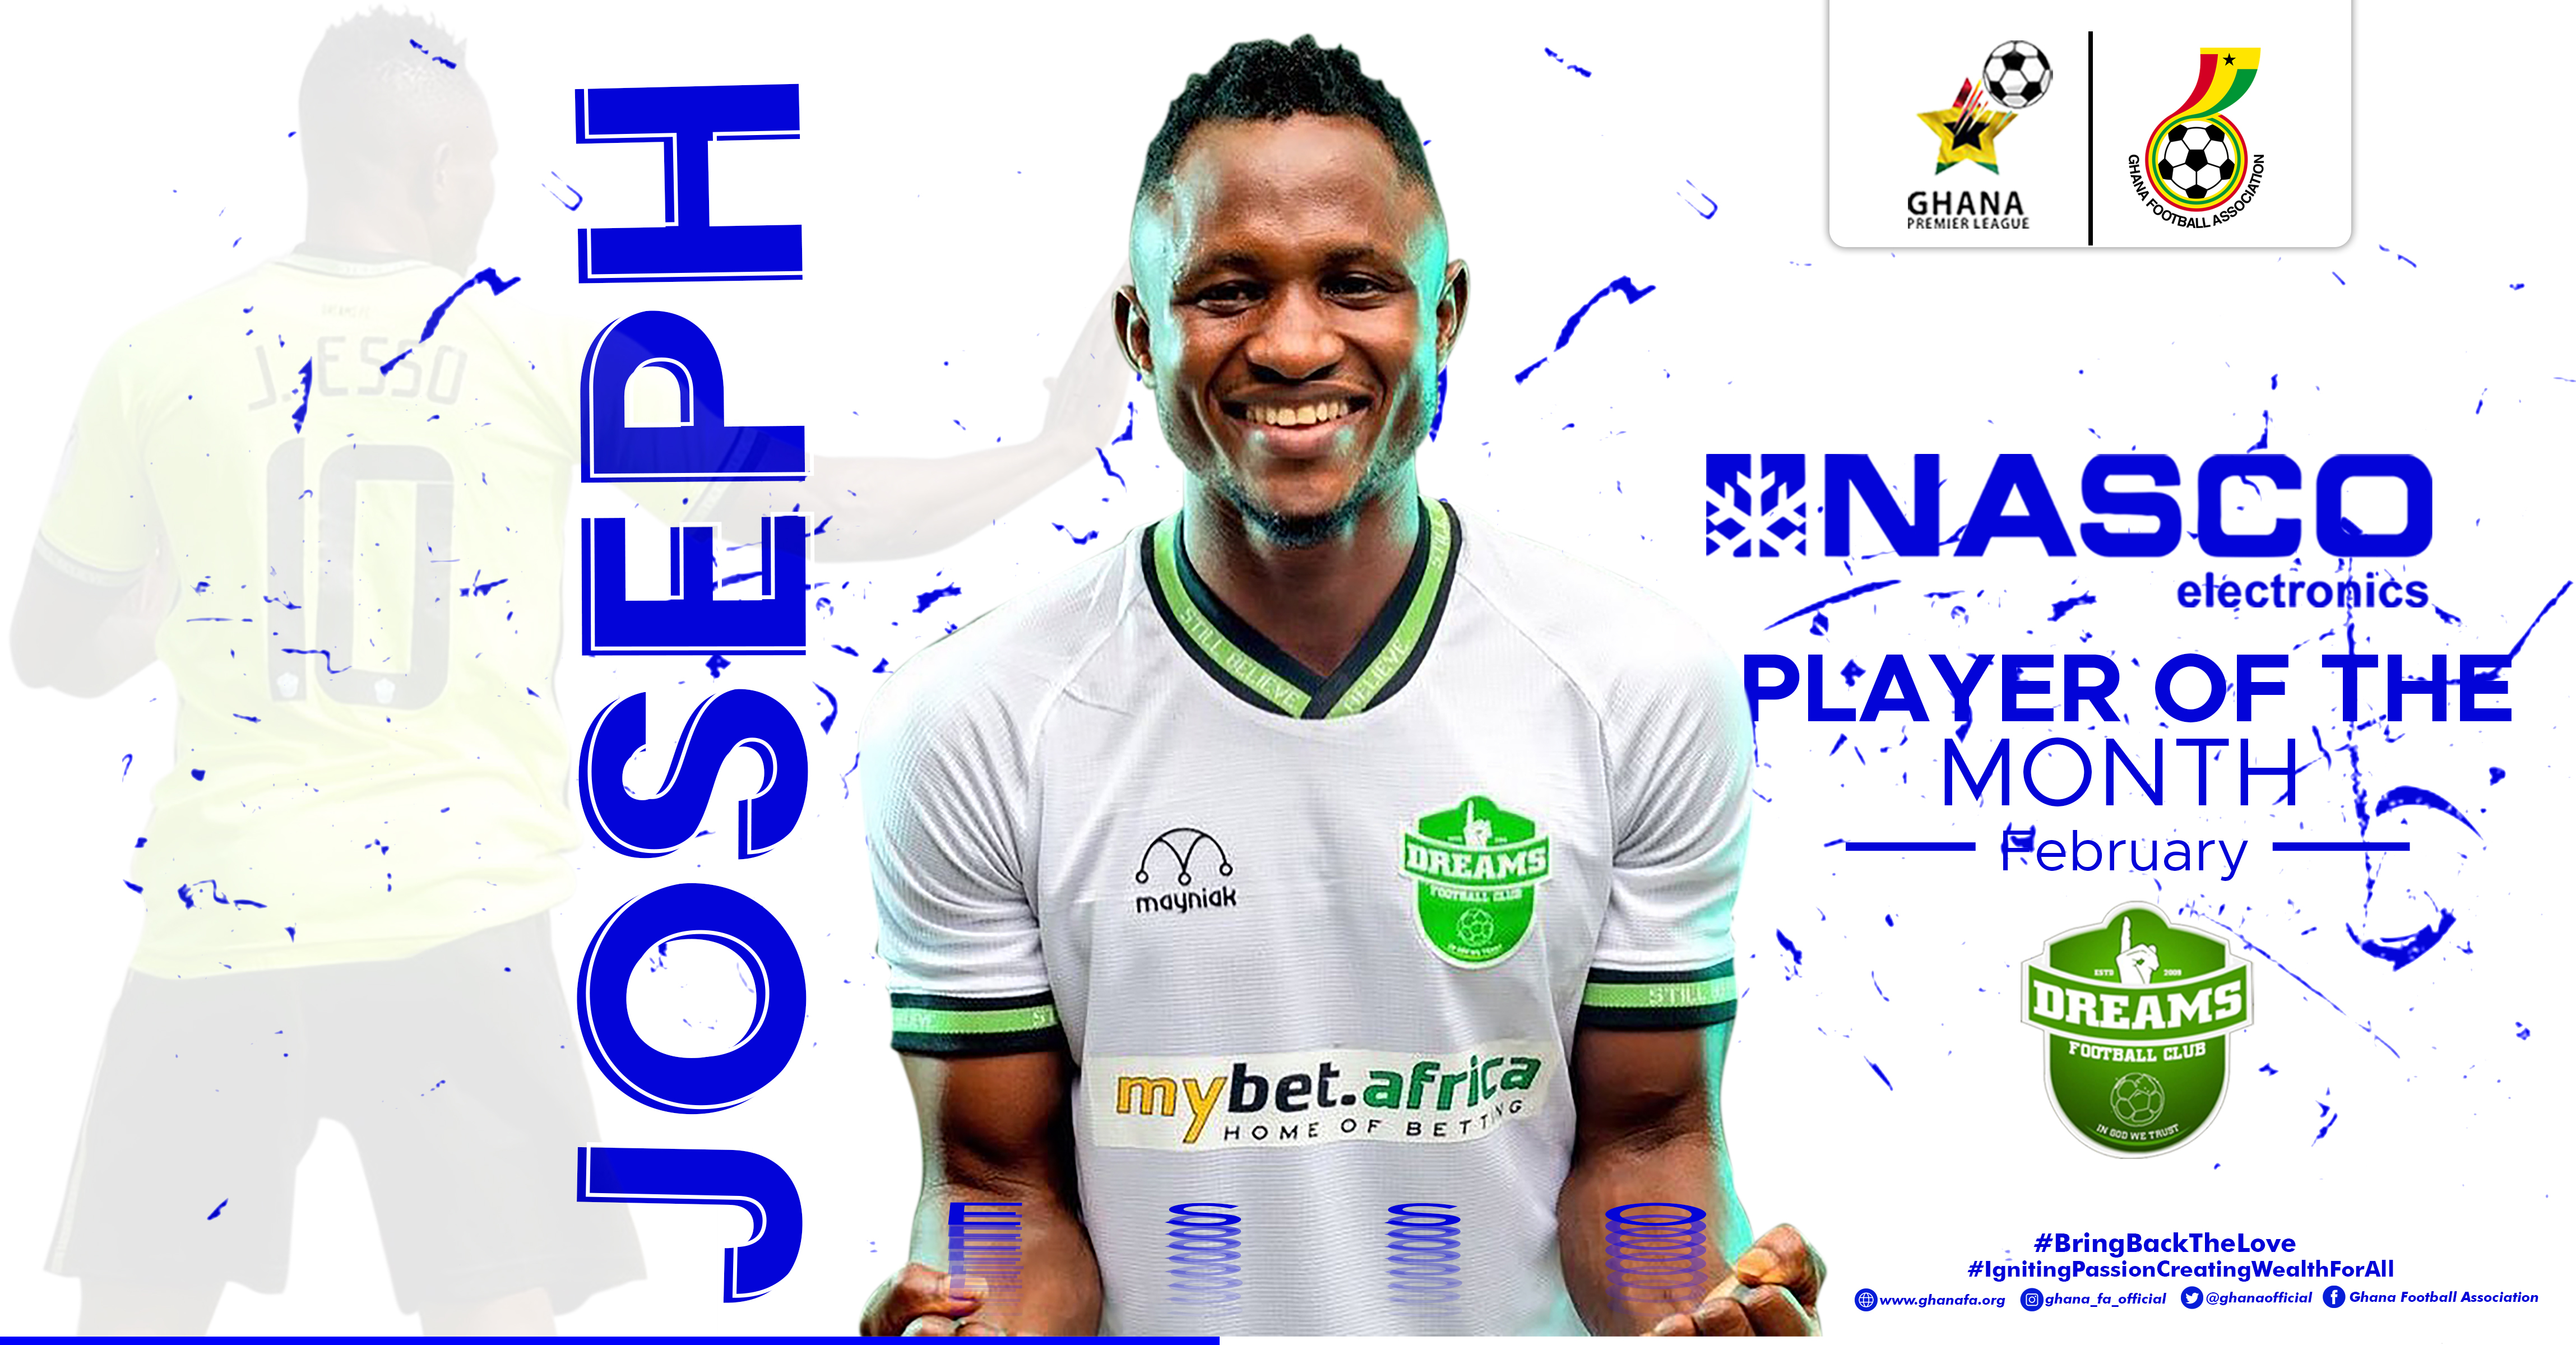 Esso wins NASCO Player of the Month for February